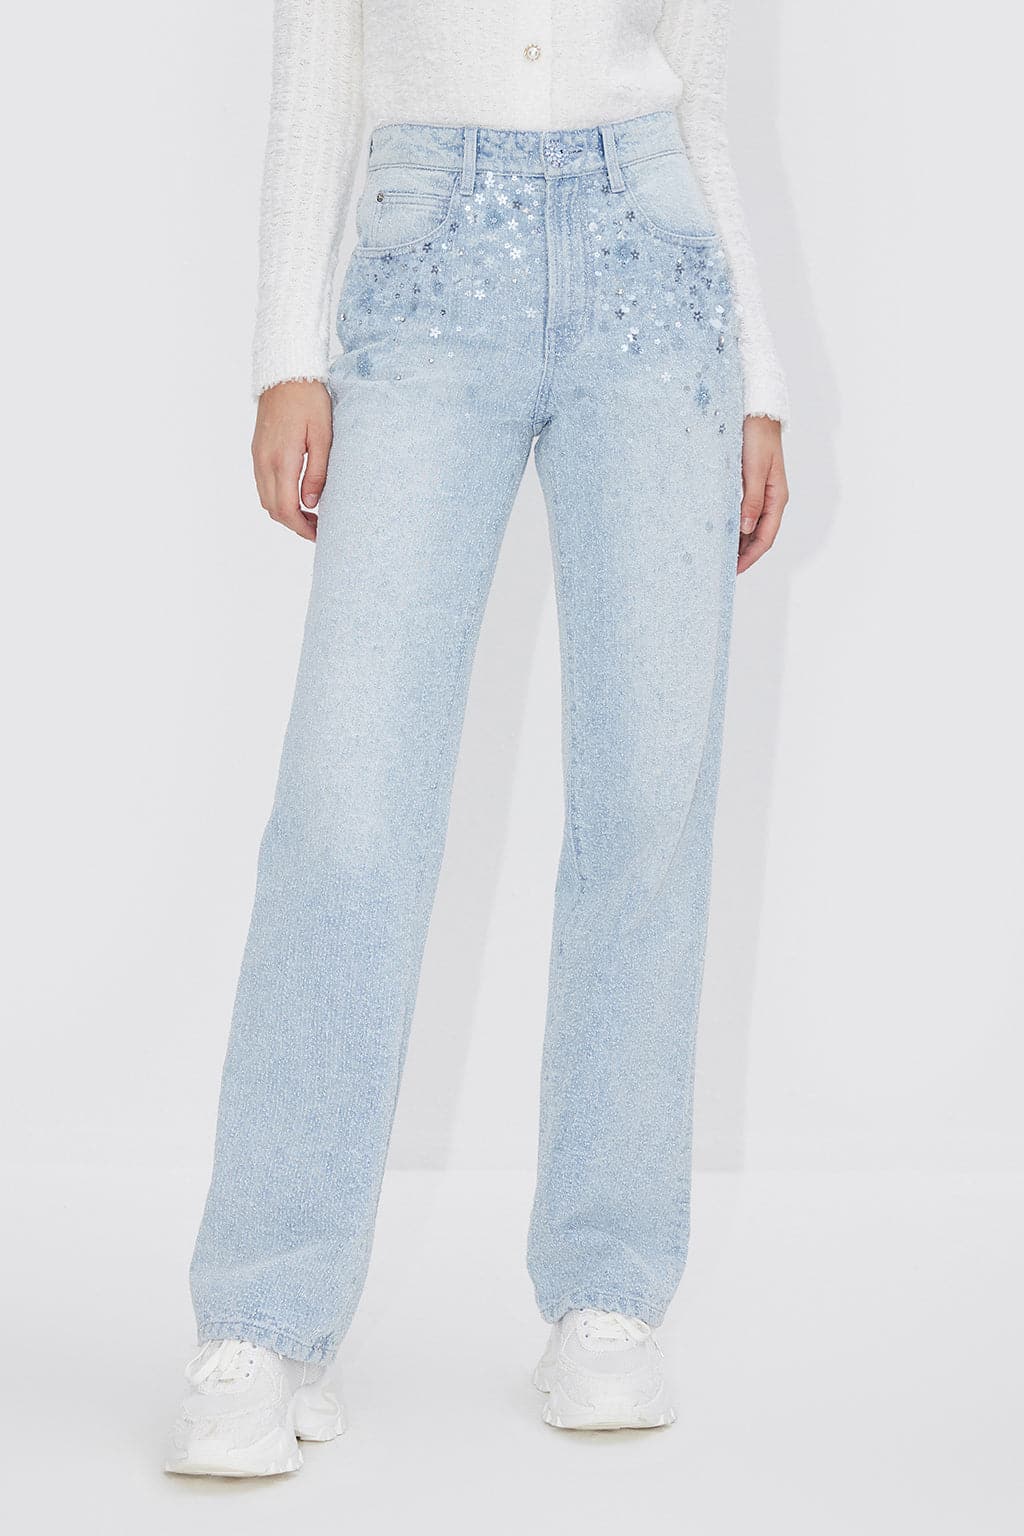 High Waist Jeans With Beaded Embellishment – MISS SIXTY